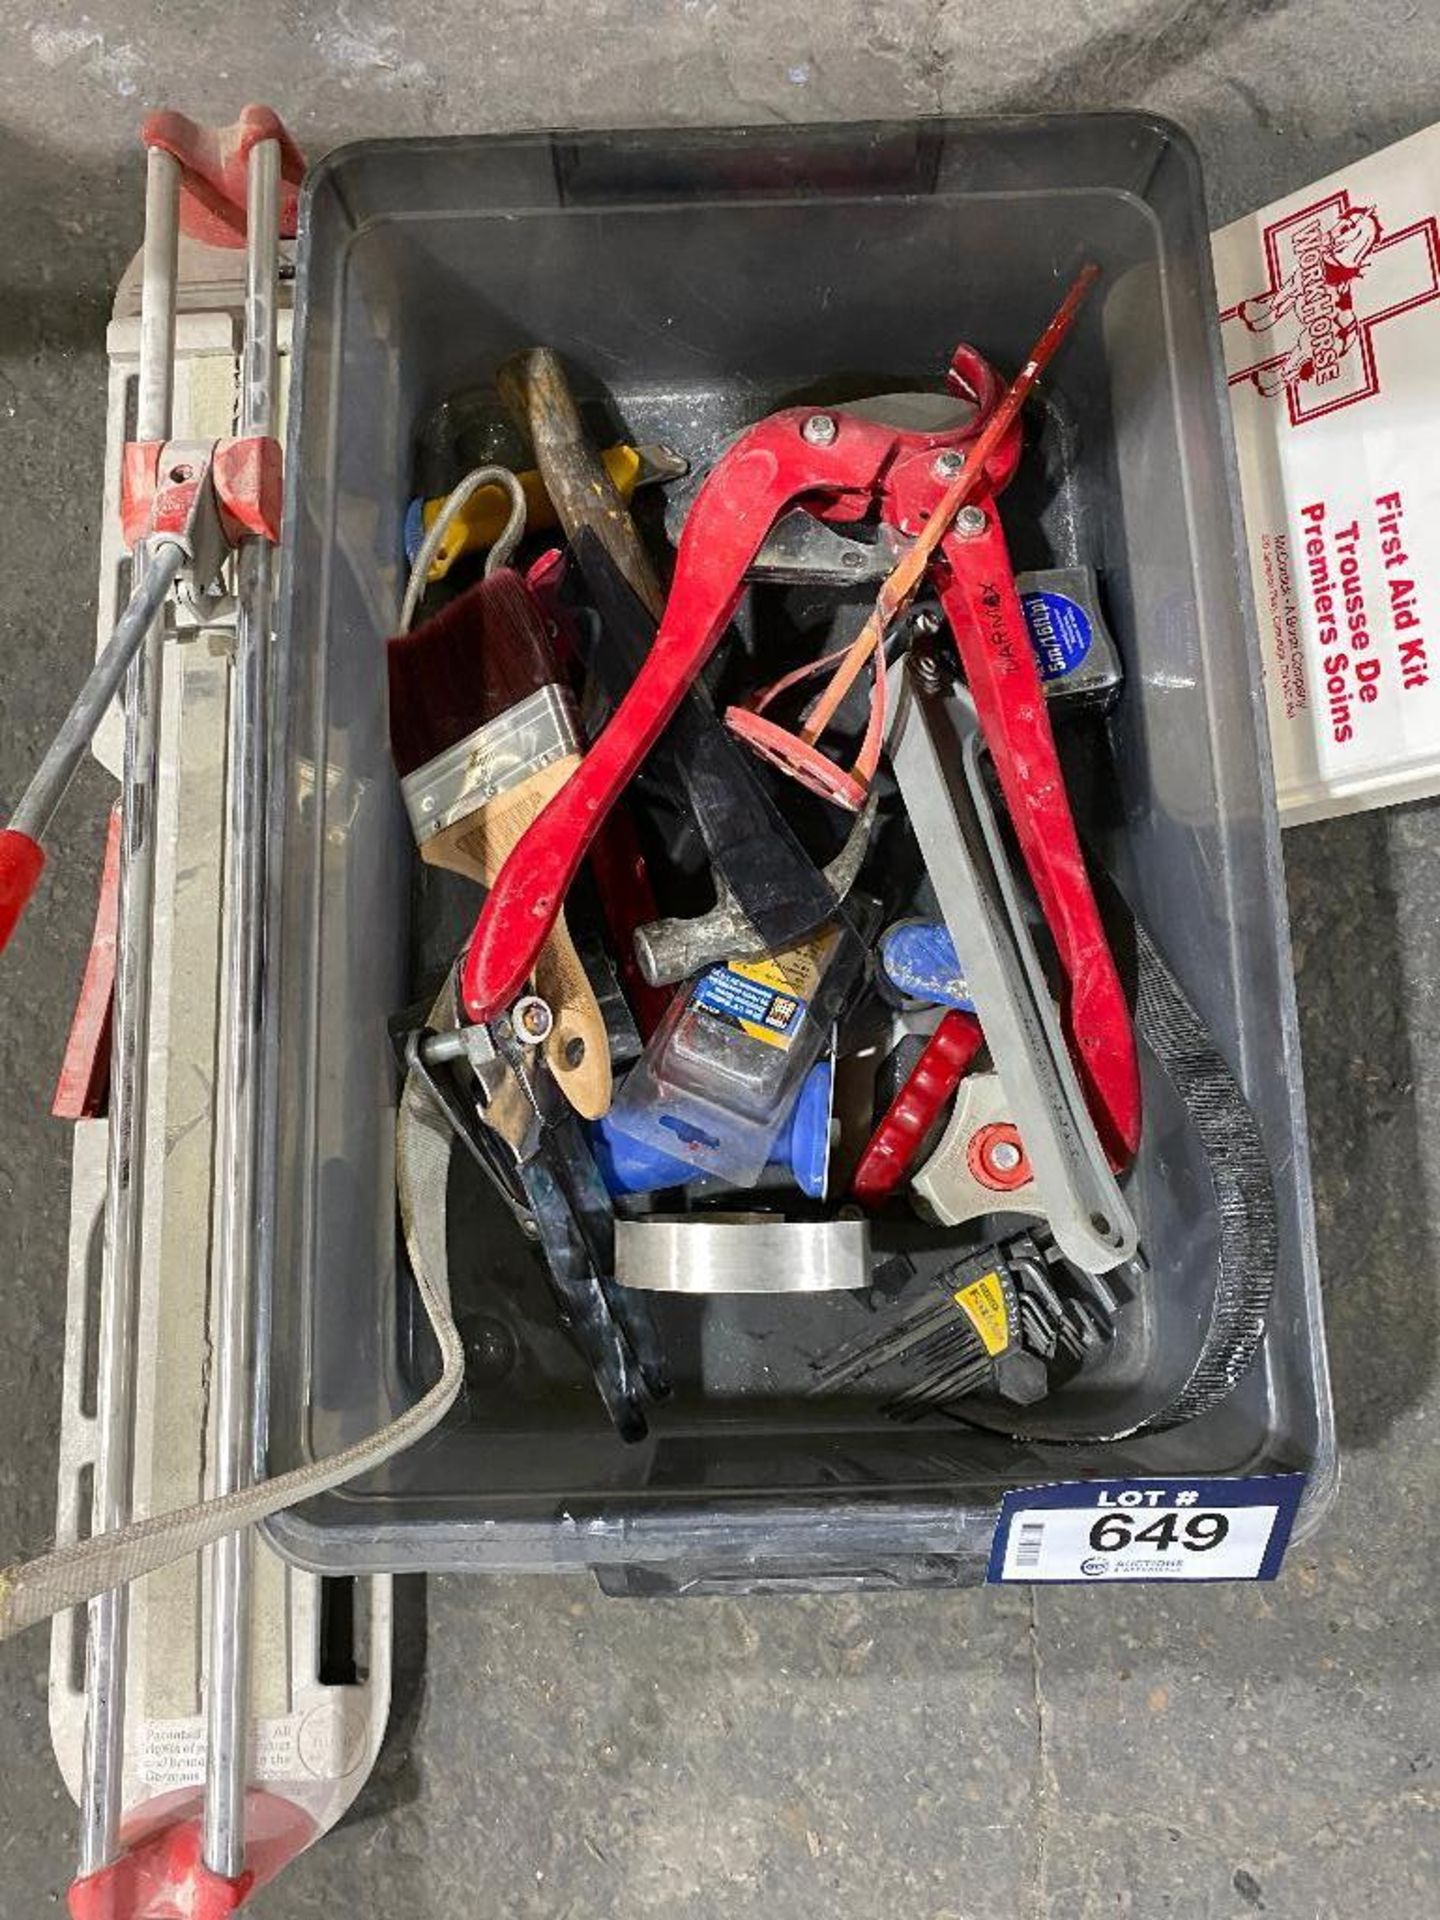 Lot of Asst. Tools including Filter Wrenches, Hammer, Tape Measure, etc. - Image 3 of 3